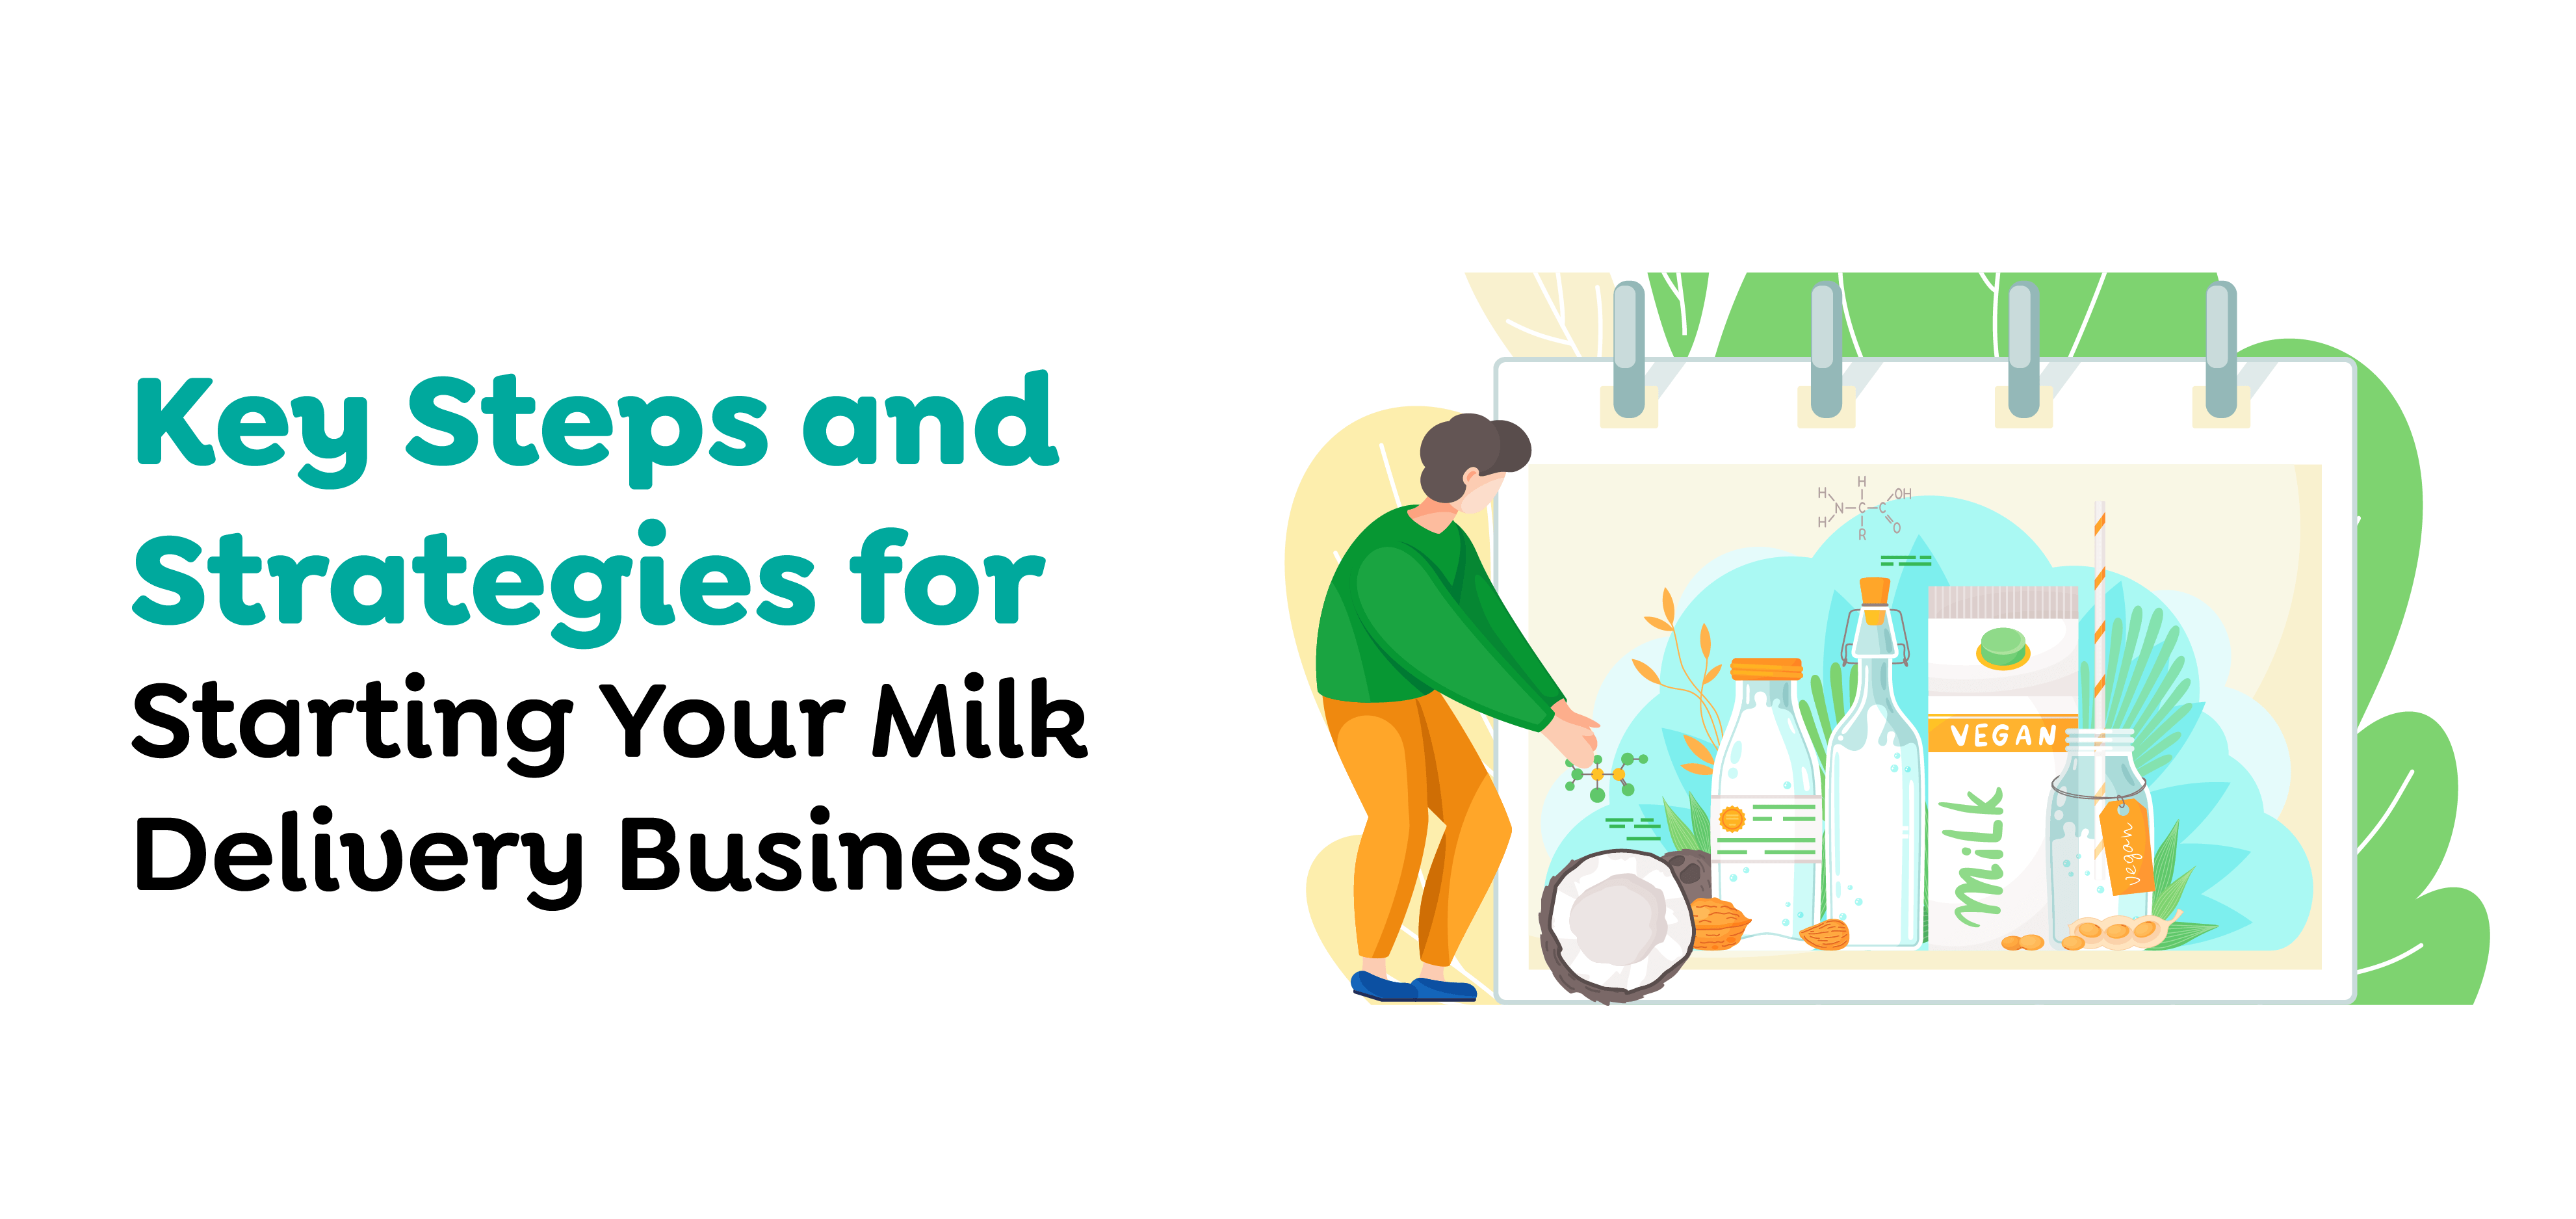 Milk Delivery Business